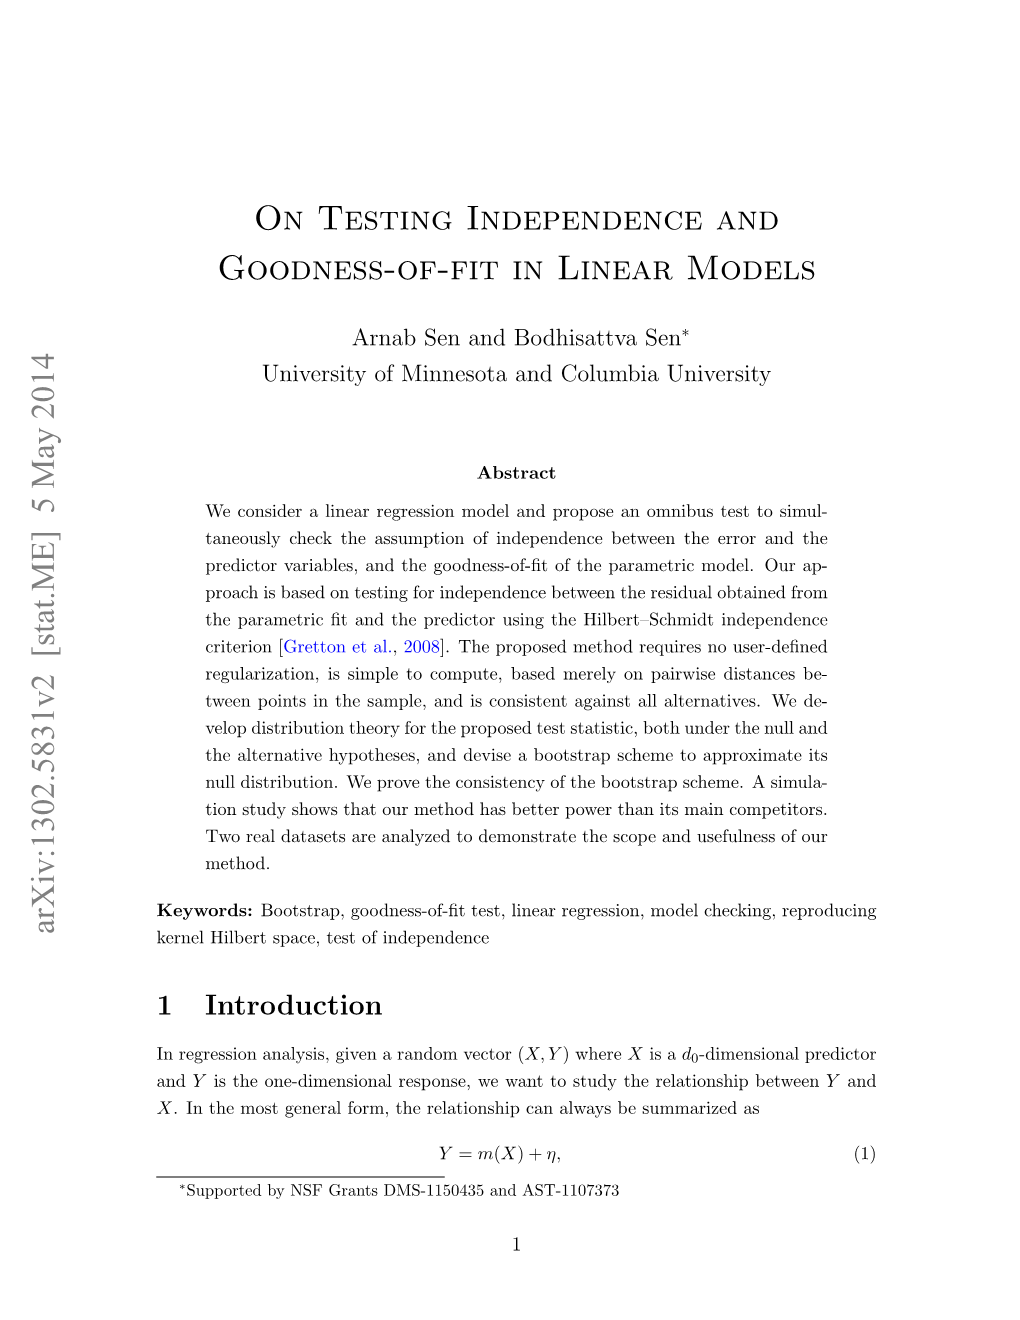 On Testing Independence and Goodness-Of-Fit in Linear Models